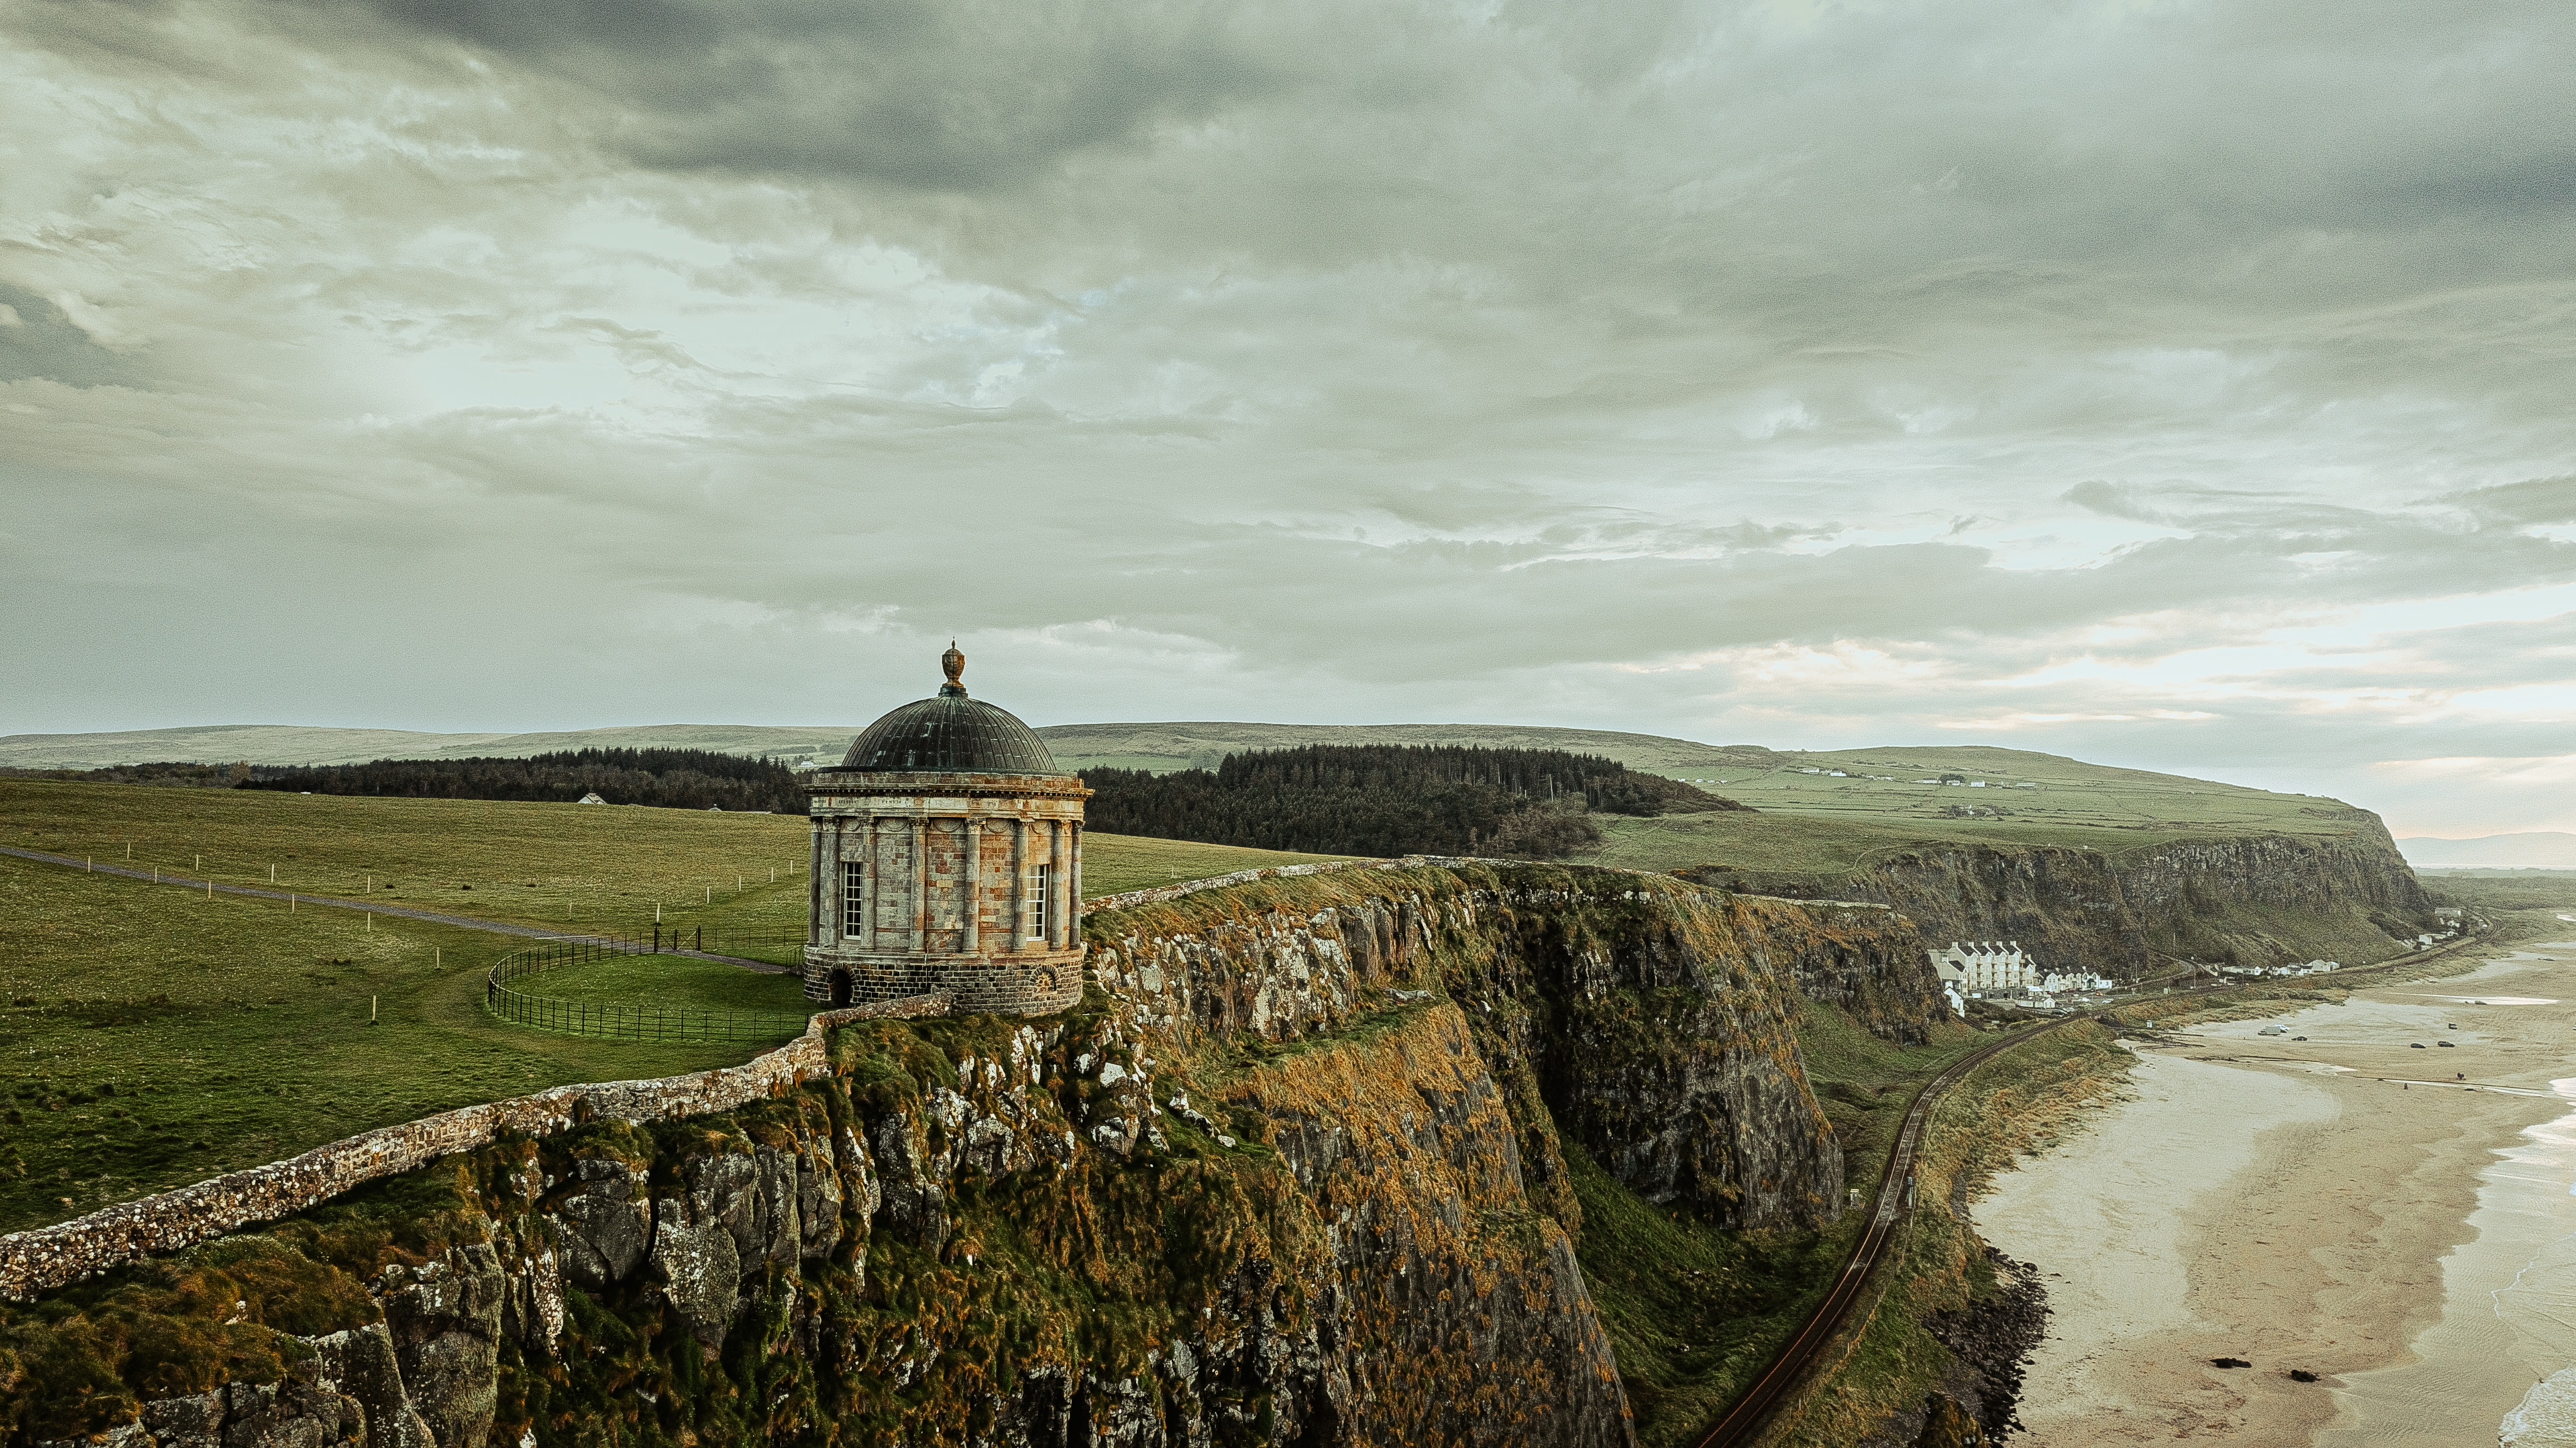 Game of Thrones Filming Location: Mussenden Temple